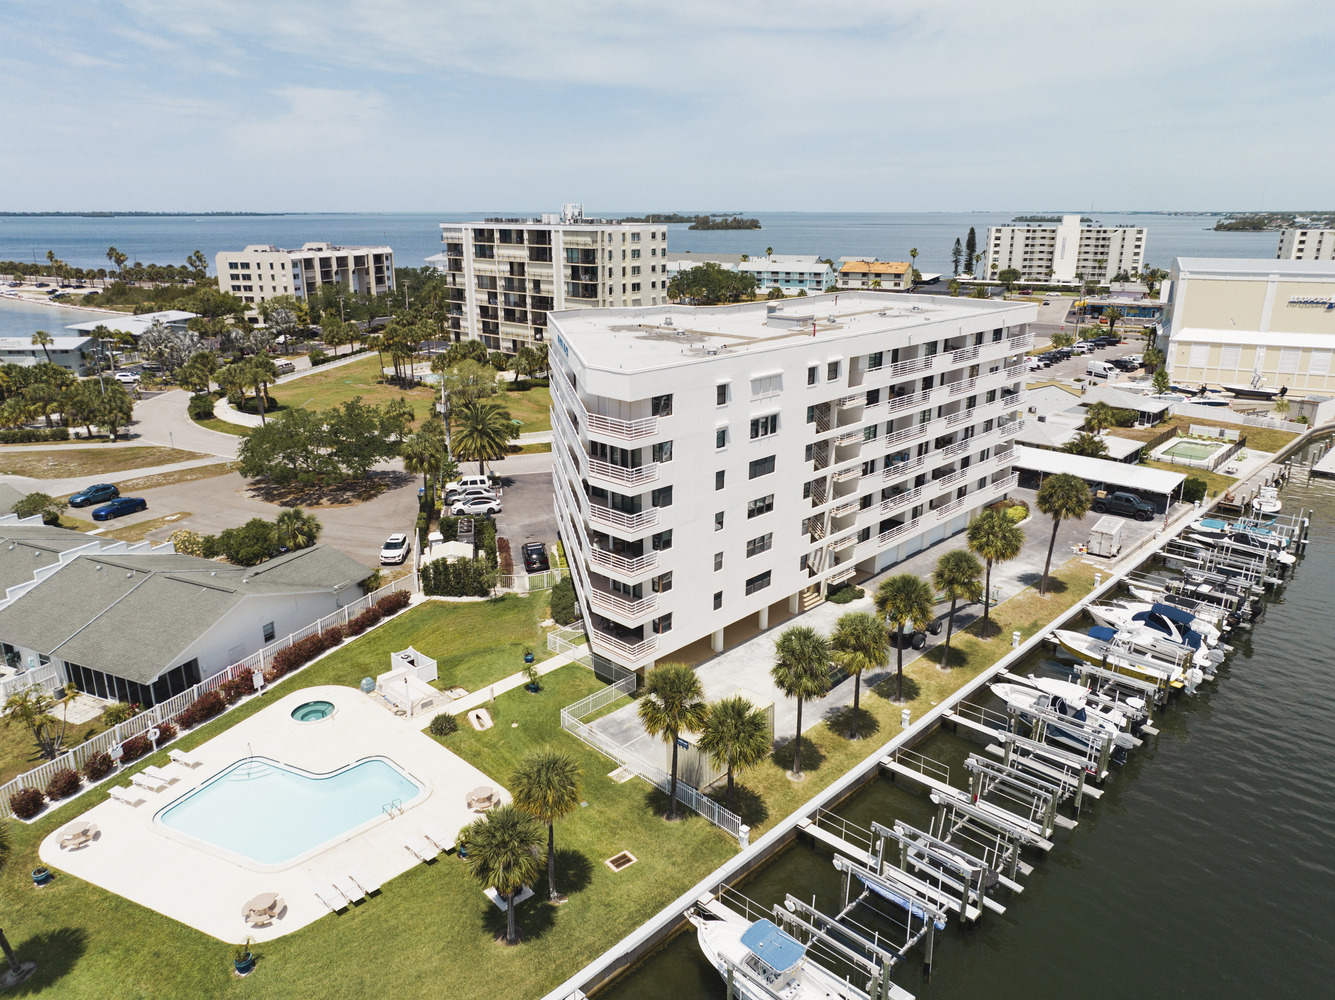 Marina Place condo seen from above, with swimming pool, palm trees, and harbor full of boats in the foreground